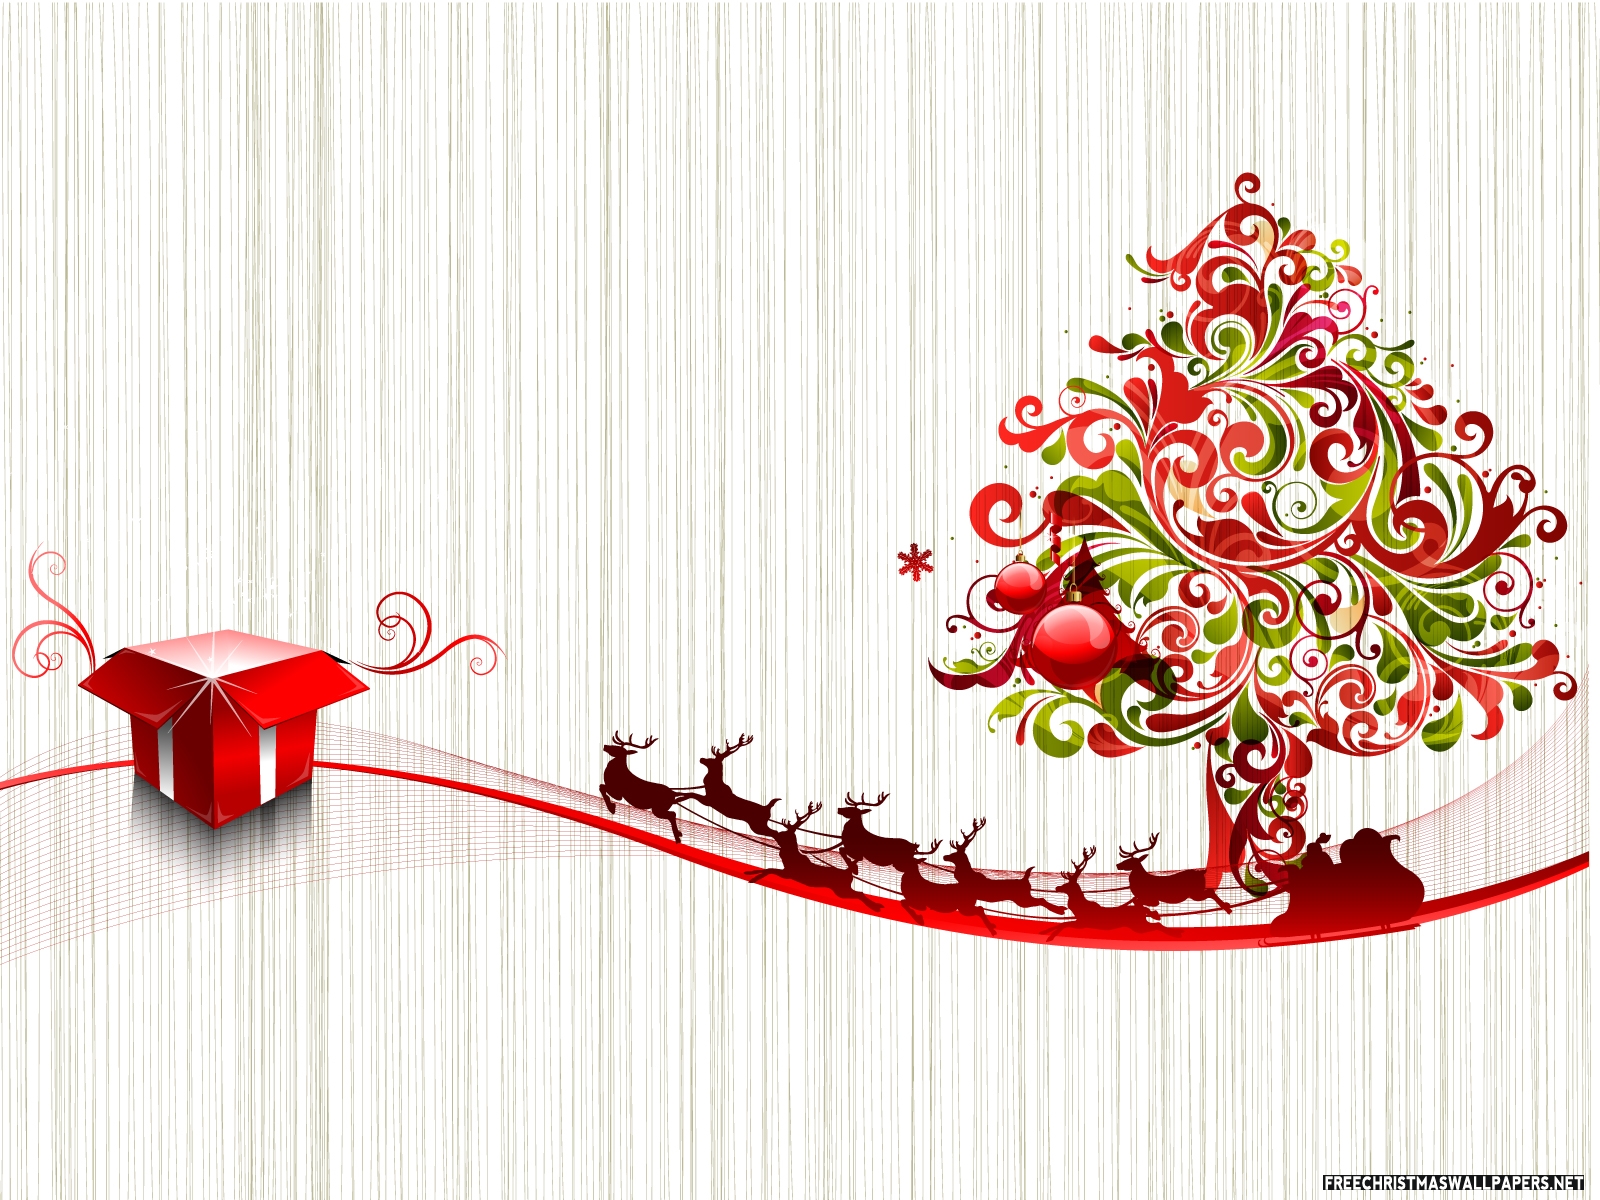 45 New Free Collection of HD Christmas Wallpapers | PSDreview